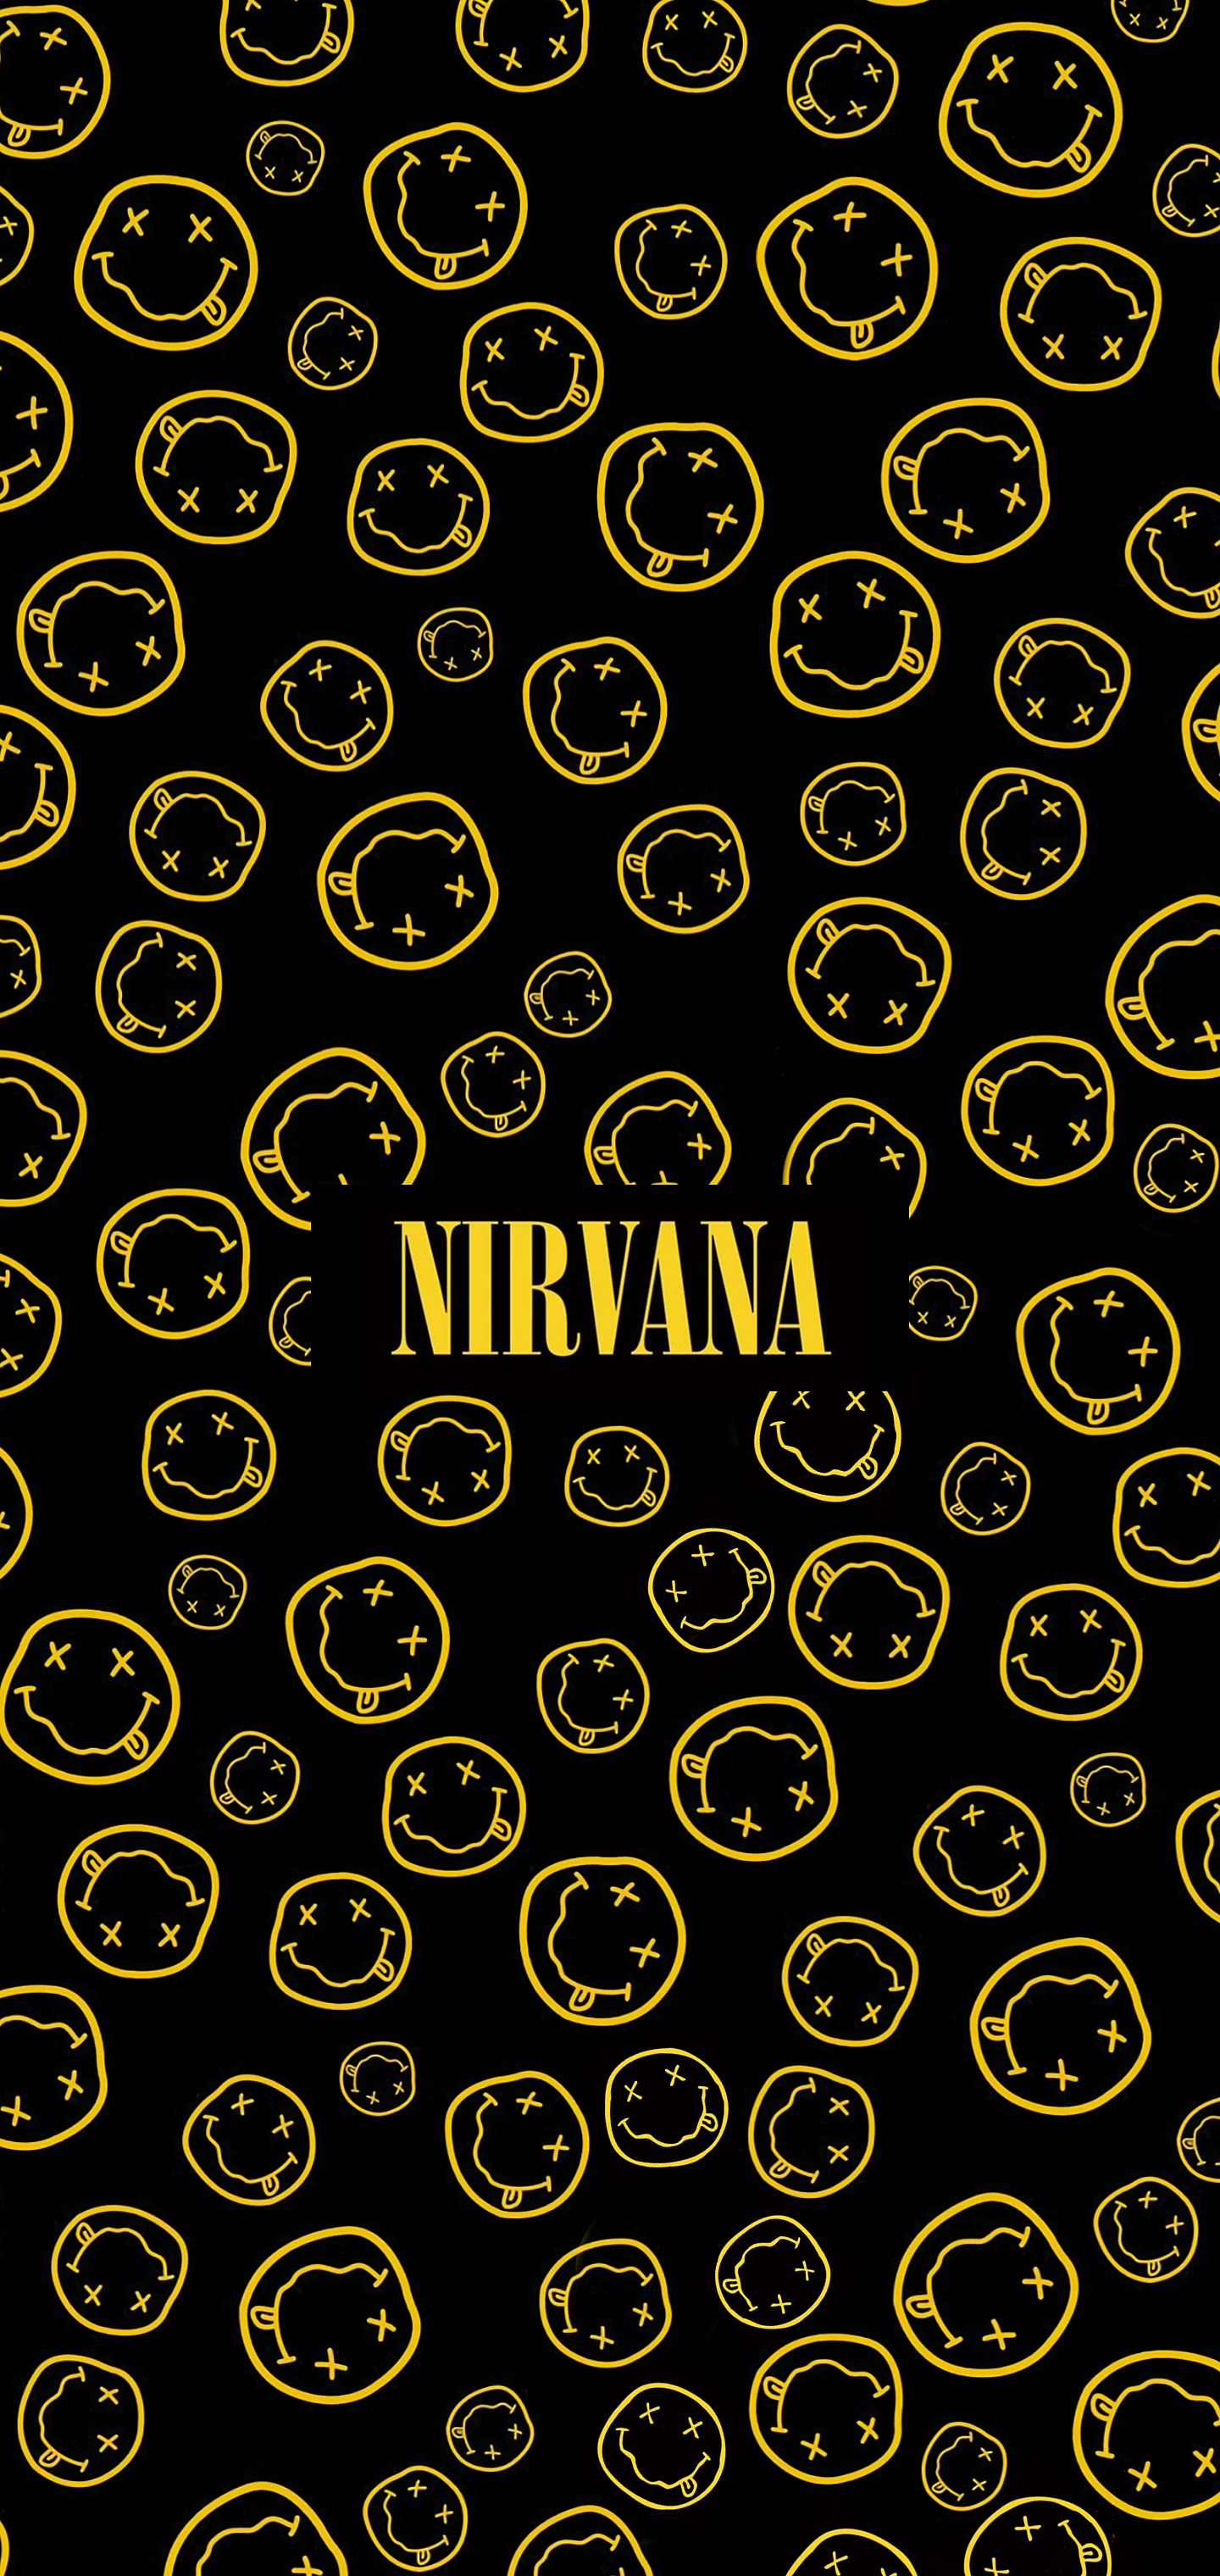 Nirvana Smiley Graphic WALL (With Logo) by Dthlives